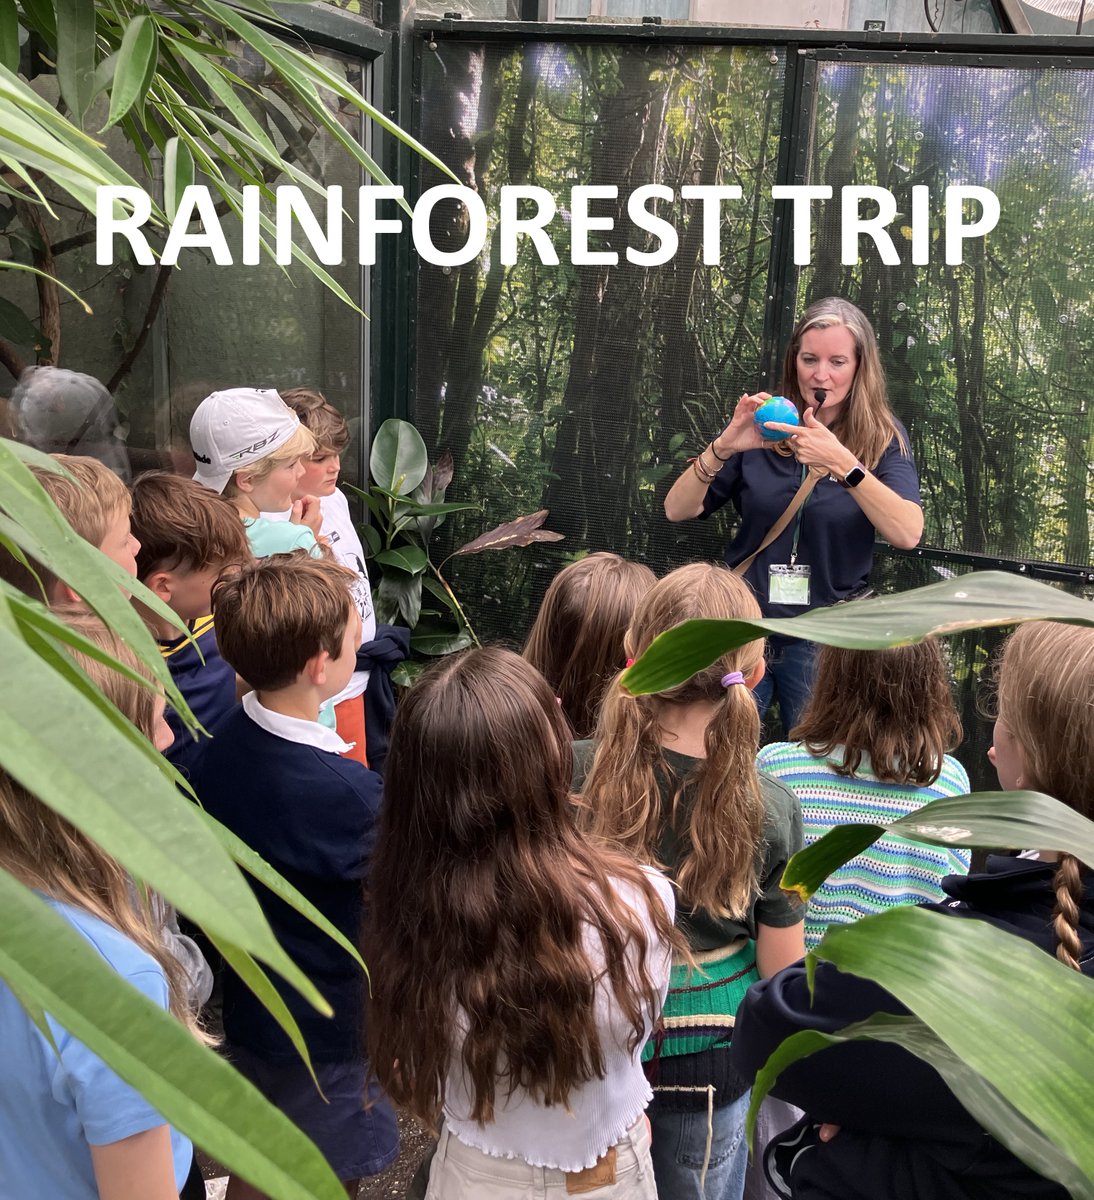 Group 3 had a fantastic trip to the Living Rainforest in Thatcham. They enjoyed seeing an array of animals including Cinnamon the sloth, an armadillo, toucan, marmoset, sting ray and iguana. 

#schooltrip #rainforest #becurious #learnaboutanimals❤️ #bedalesprep